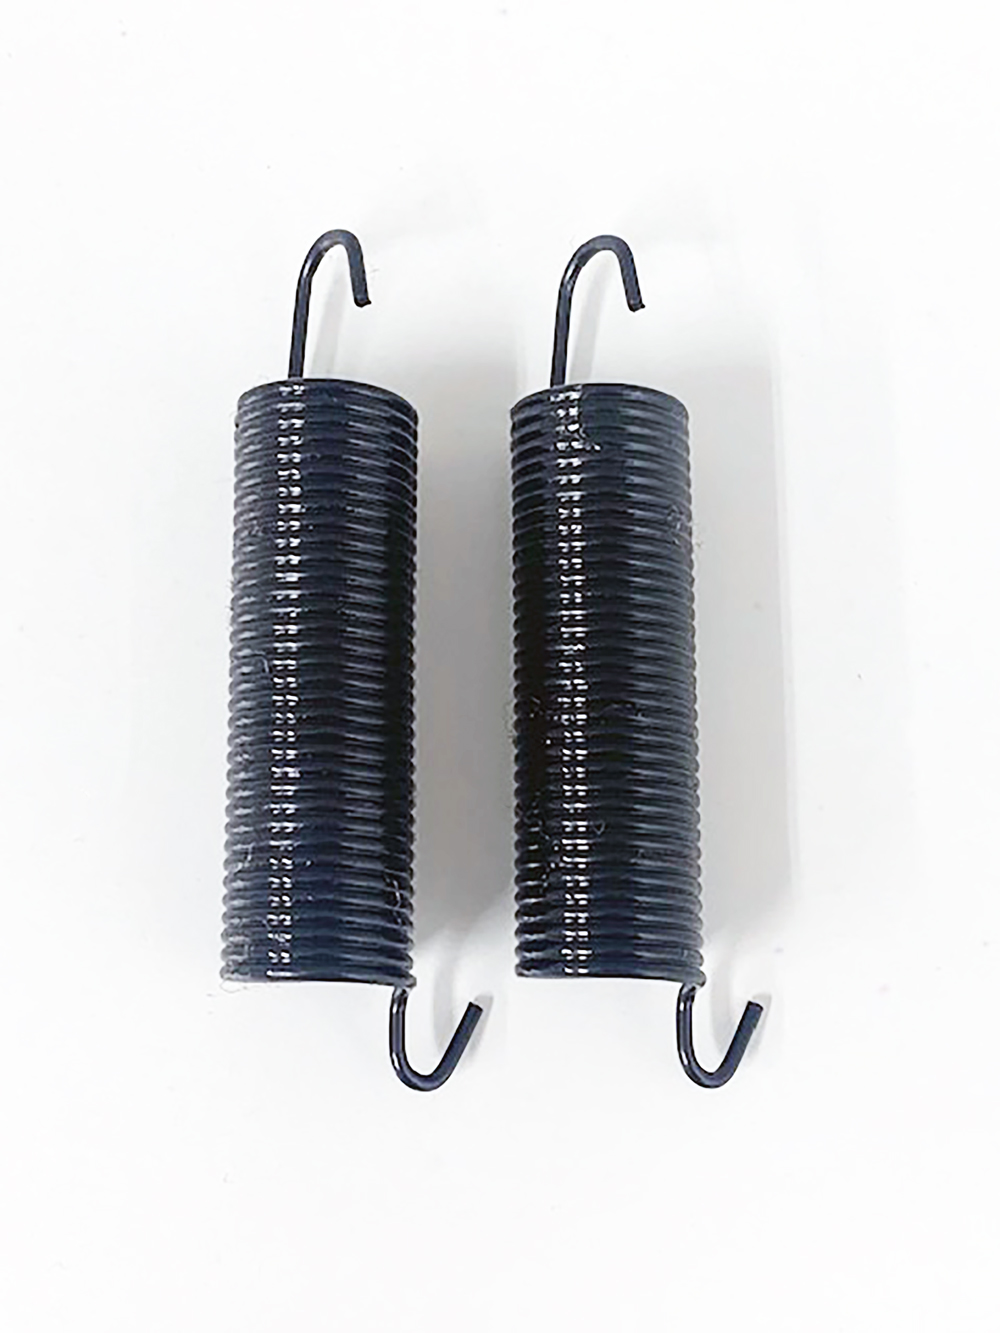 1984-1987 Turbo Buick Regal Grill Springs EACH, GBodyParts.com